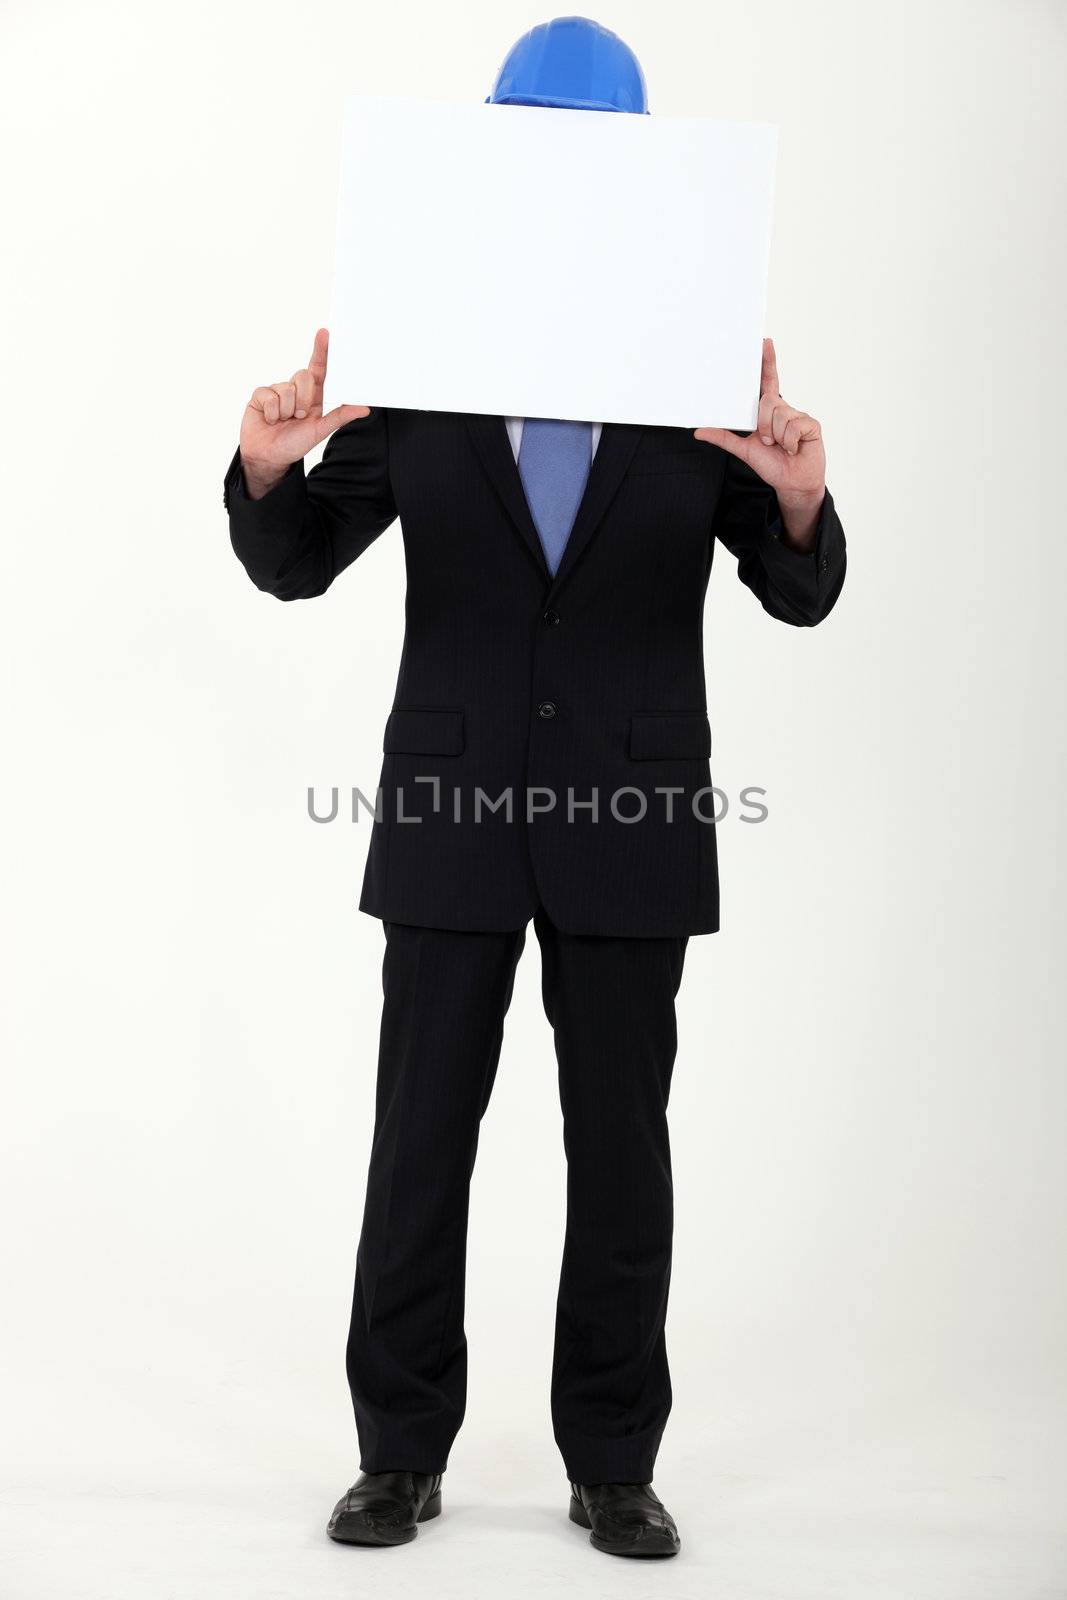 Engineer holding up a blank sign before his face